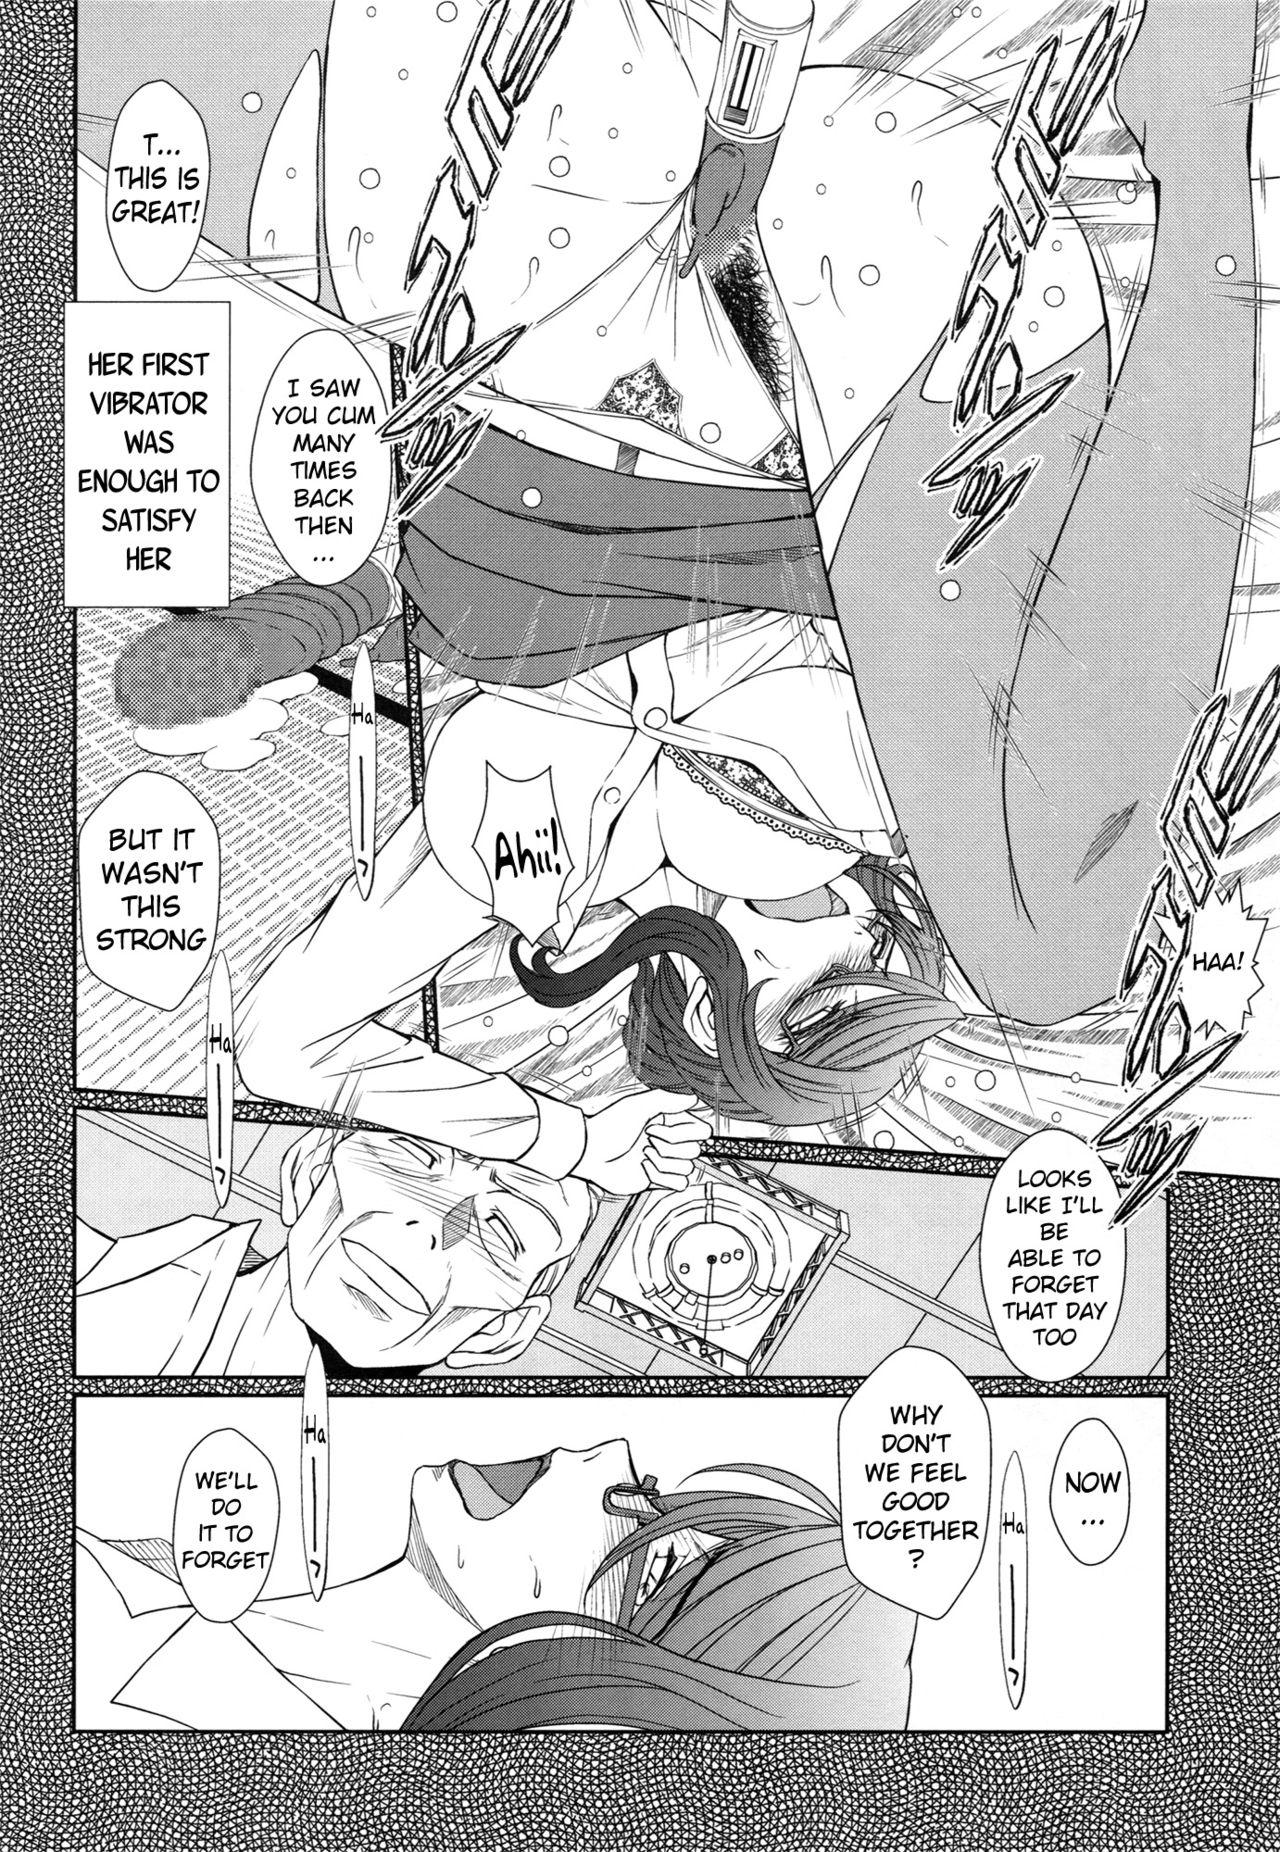 Orgame Zoku Akai Boushi no Onna - Woman with a red cap - Kyuujou lovers Stepbrother - Page 9